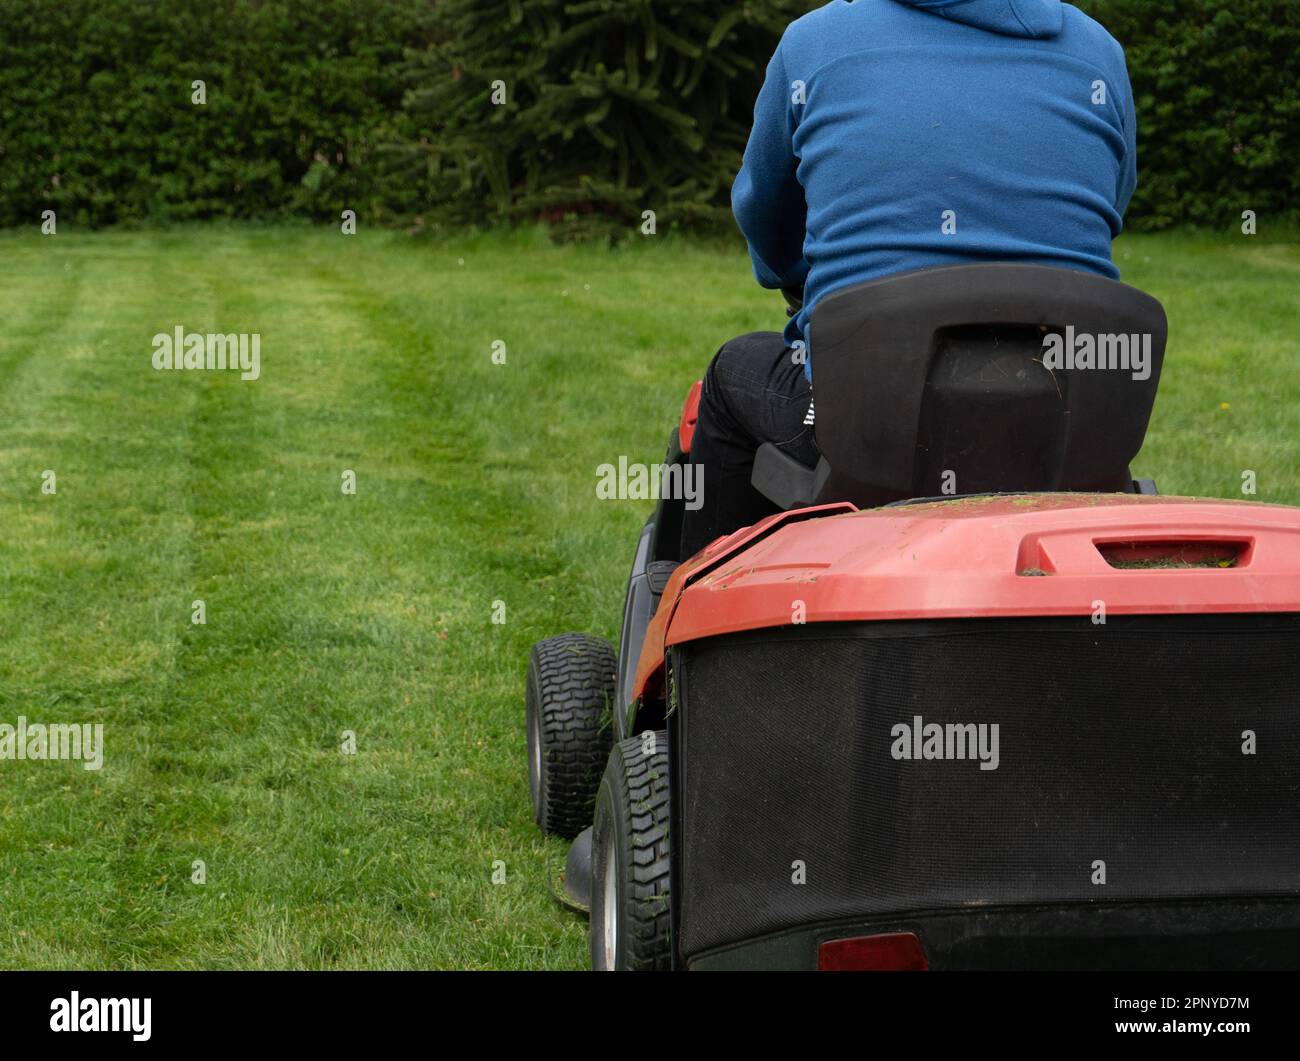 A man mows the lawn with a ride on mower. Stock Photo